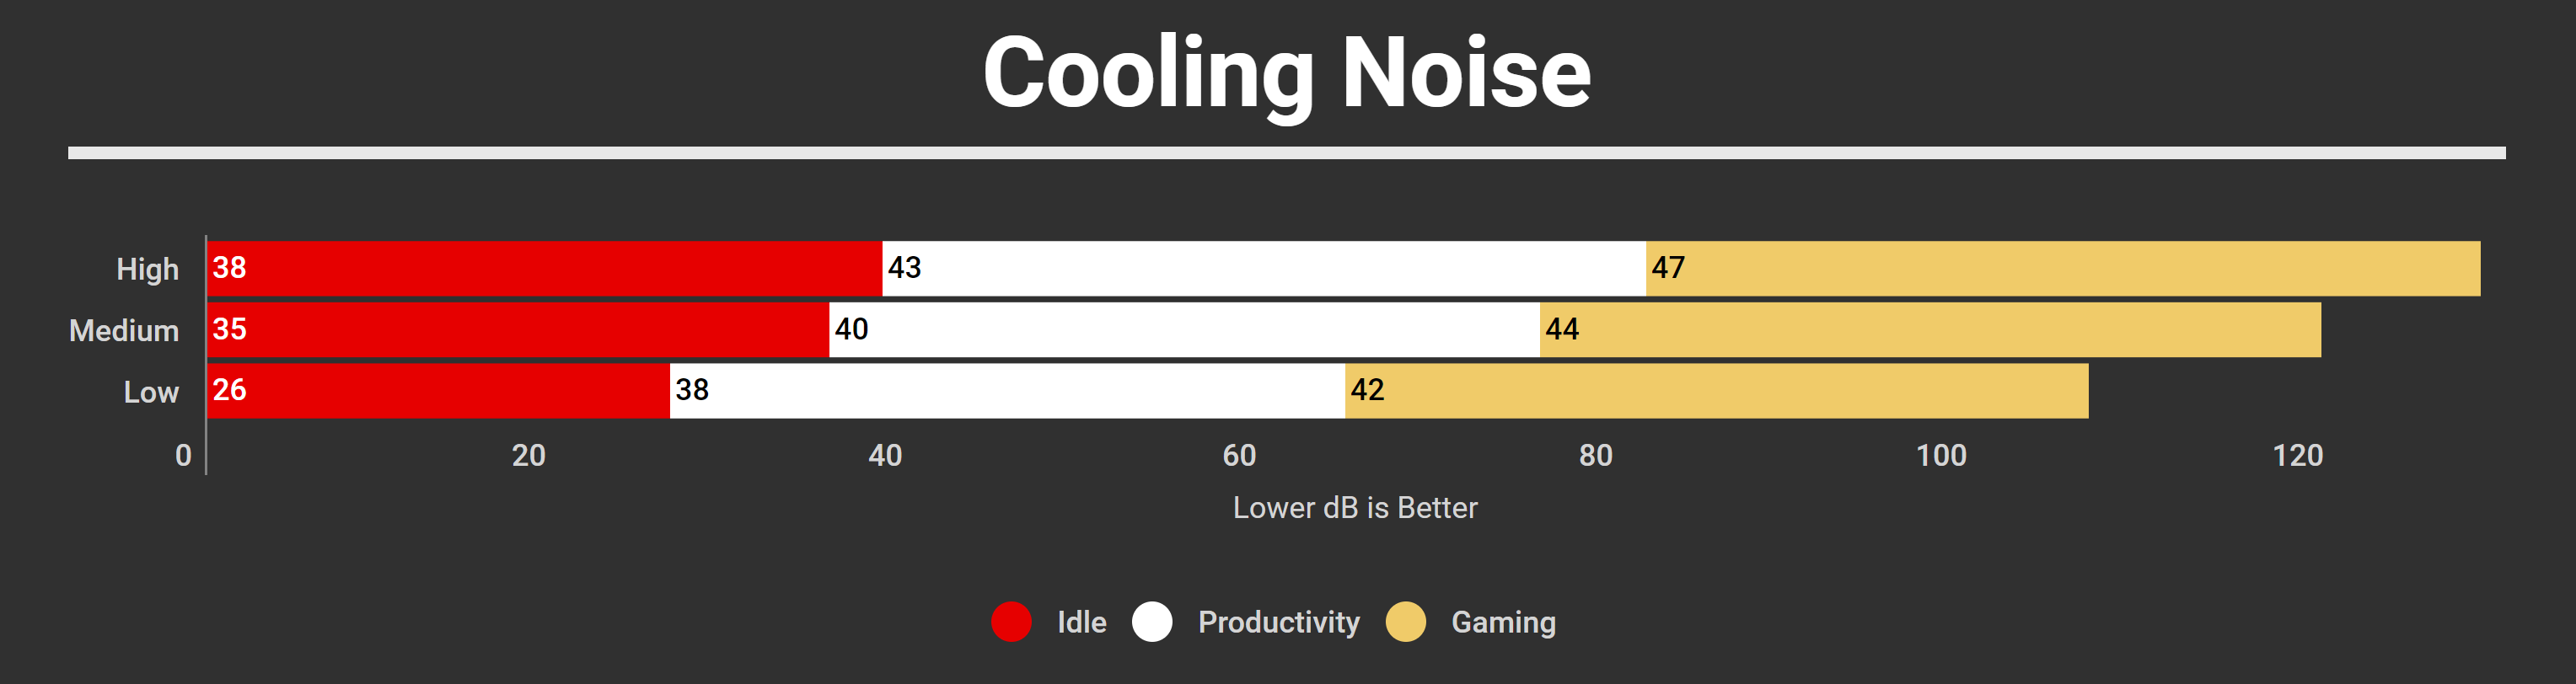 Razer Blade 15 Advanced Early 2021 Cooling Noise